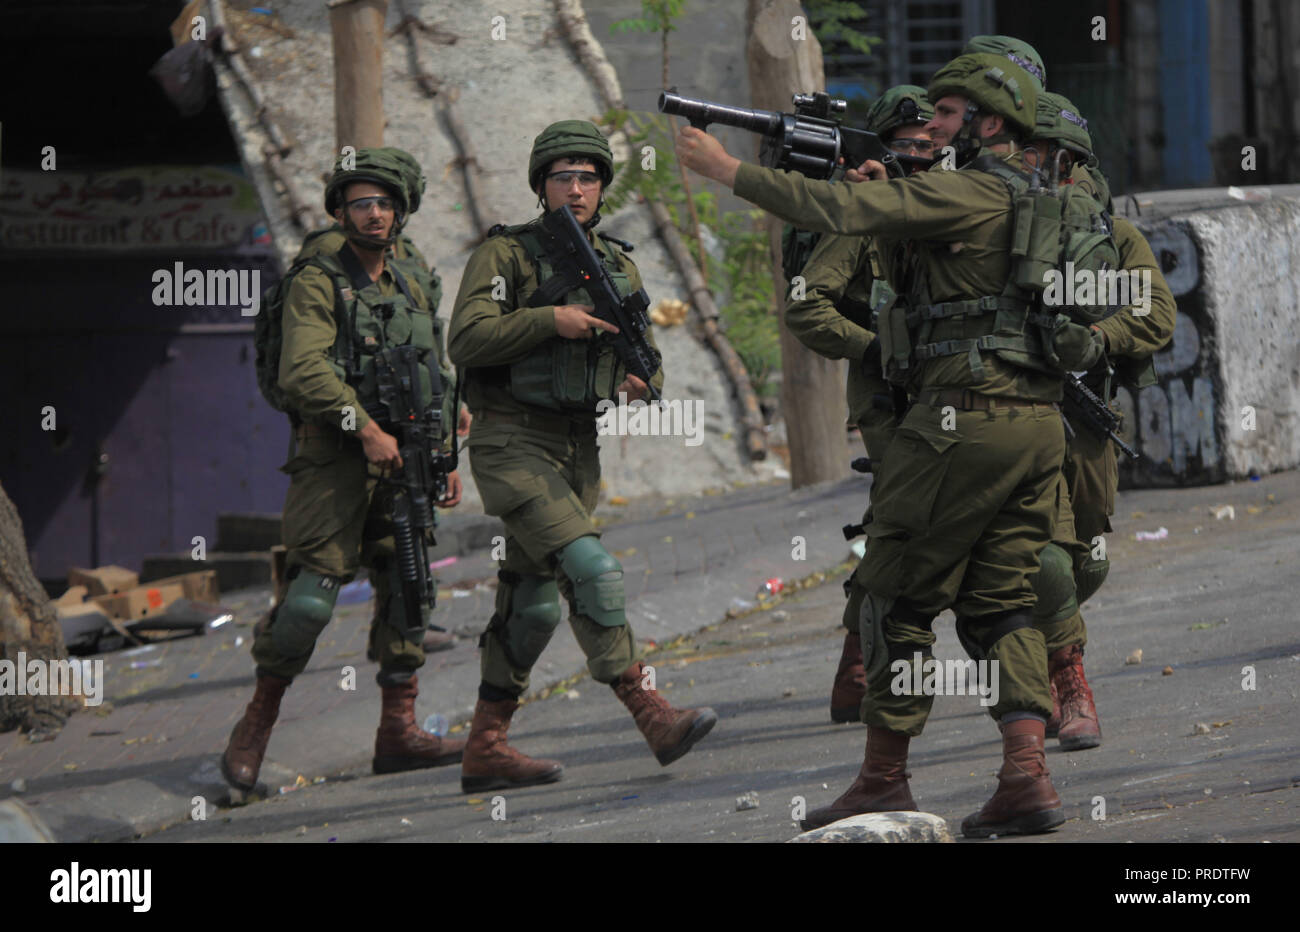 Hebron, West Bank City of Hebron. 1st Oct, 2018. An Israeli soldier fires a tear gas canister at Palestinian protesters during clashes after a protest against the recently passed Jewish nation state law, in the West Bank City of Hebron, on Oct. 1, 2018. Credit: Mamoun Wazwaz/Xinhua/Alamy Live News Stock Photo